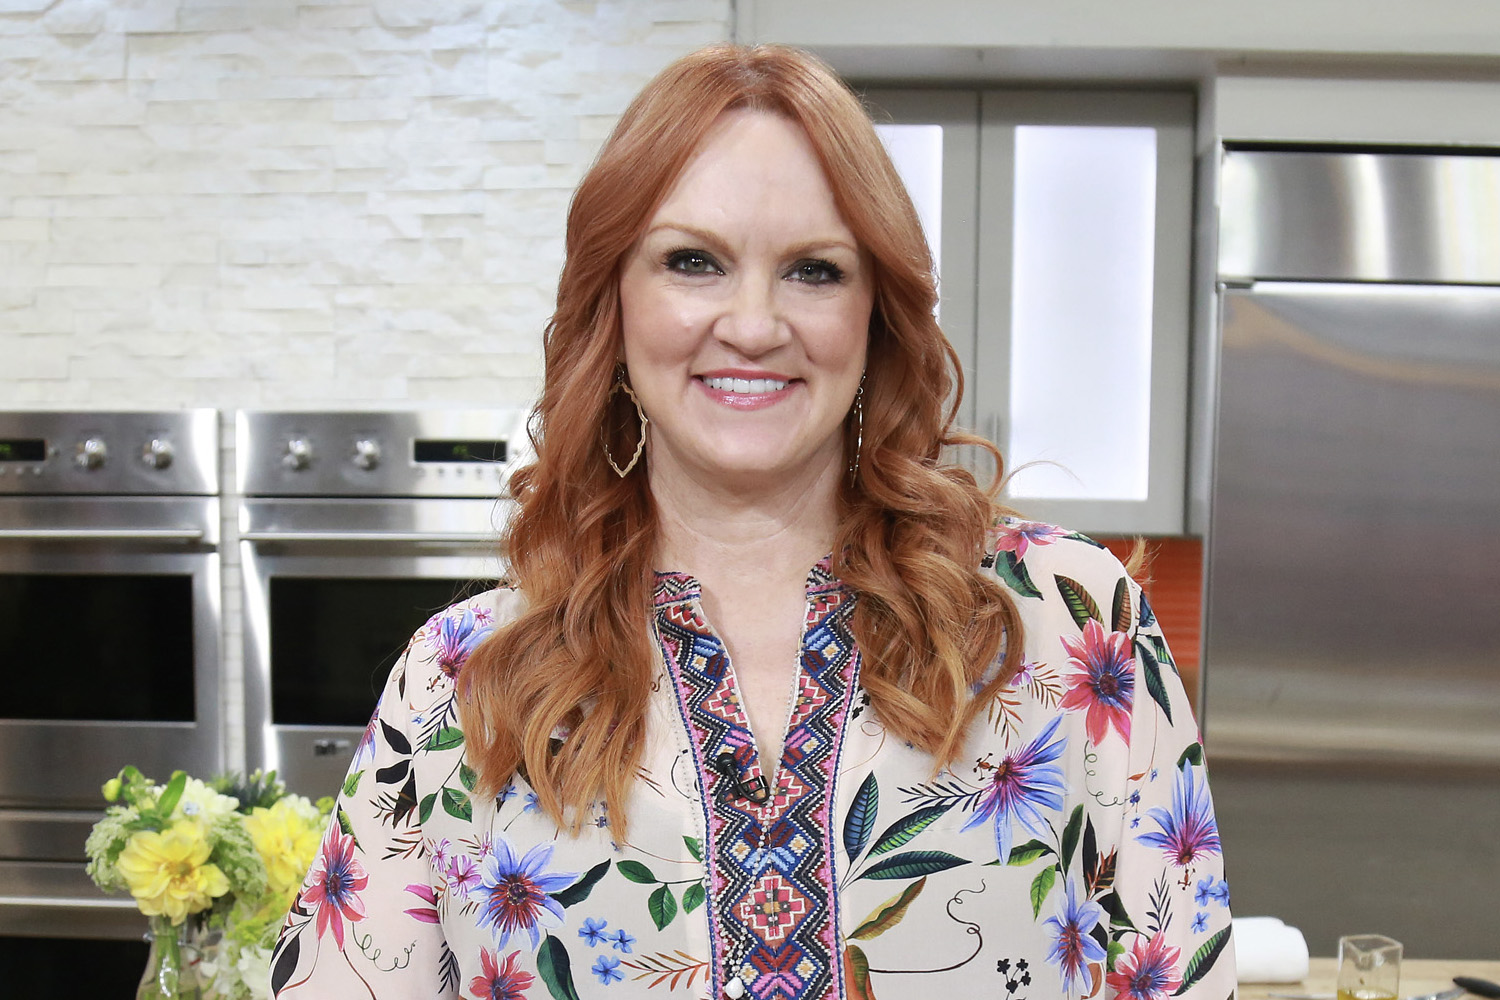 Ree Drummond smiles on the set of the 'Today' show